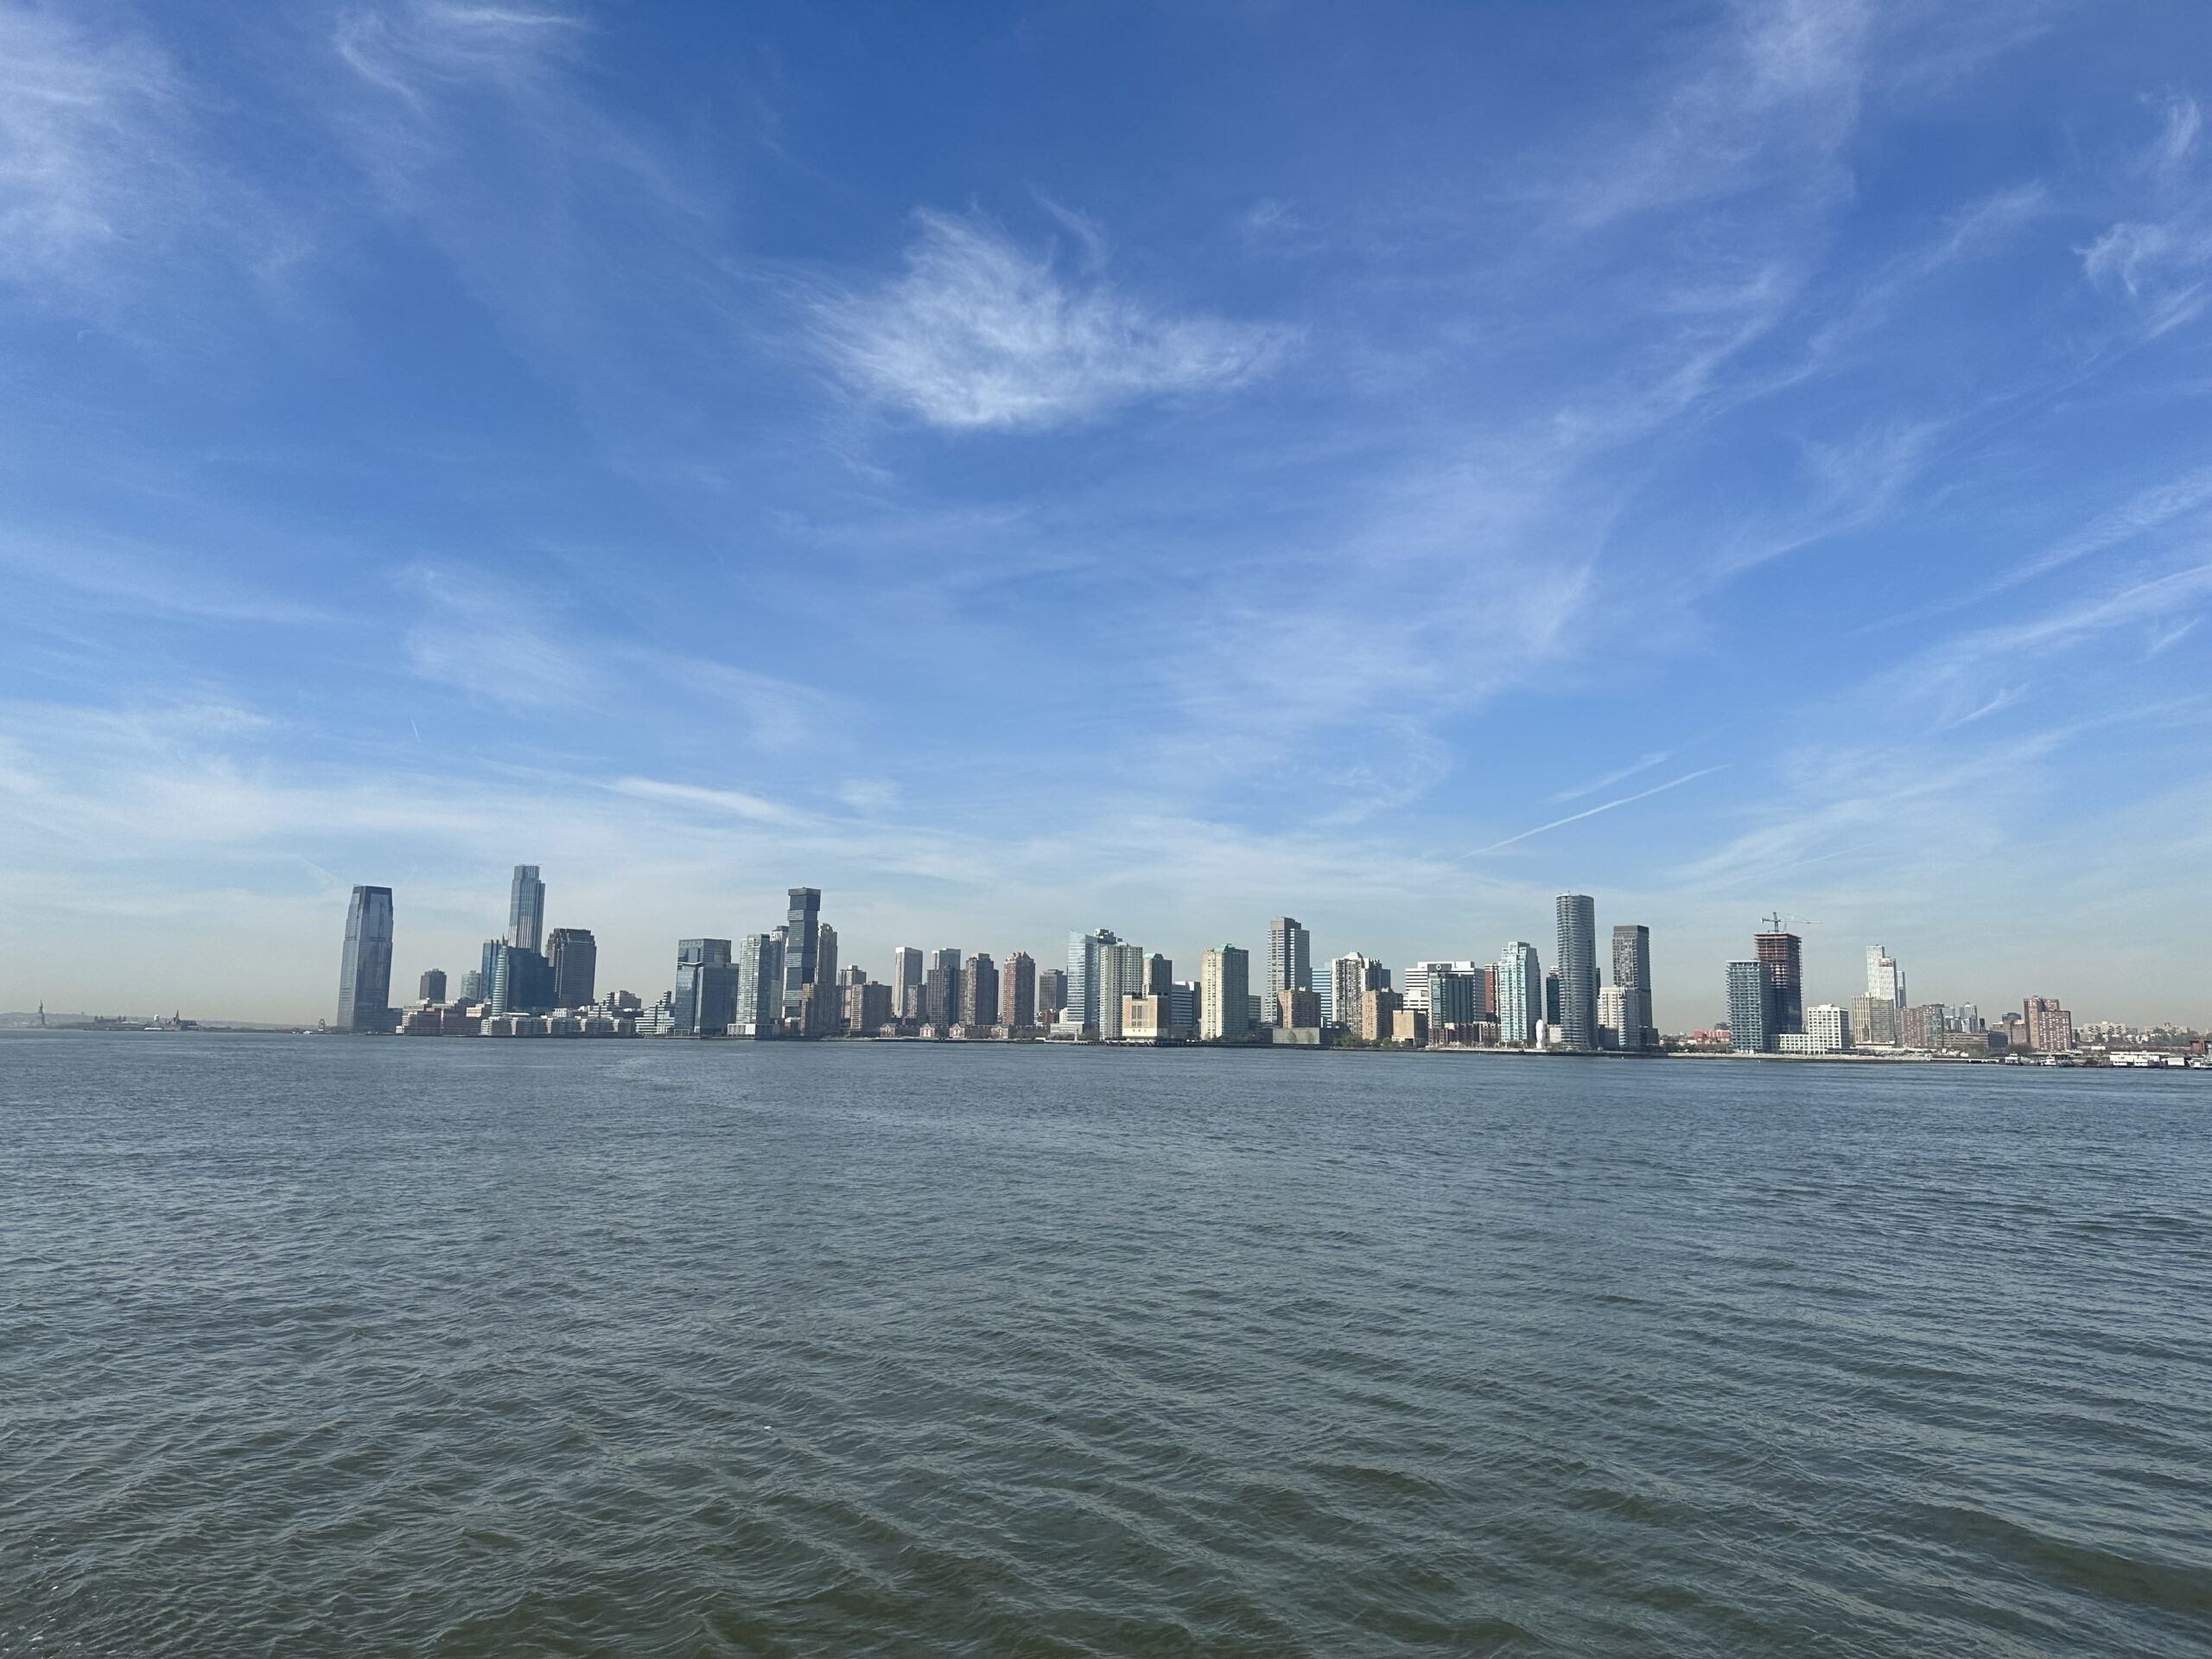 The New Jersey skyline from Hudson River Park Pier 46.